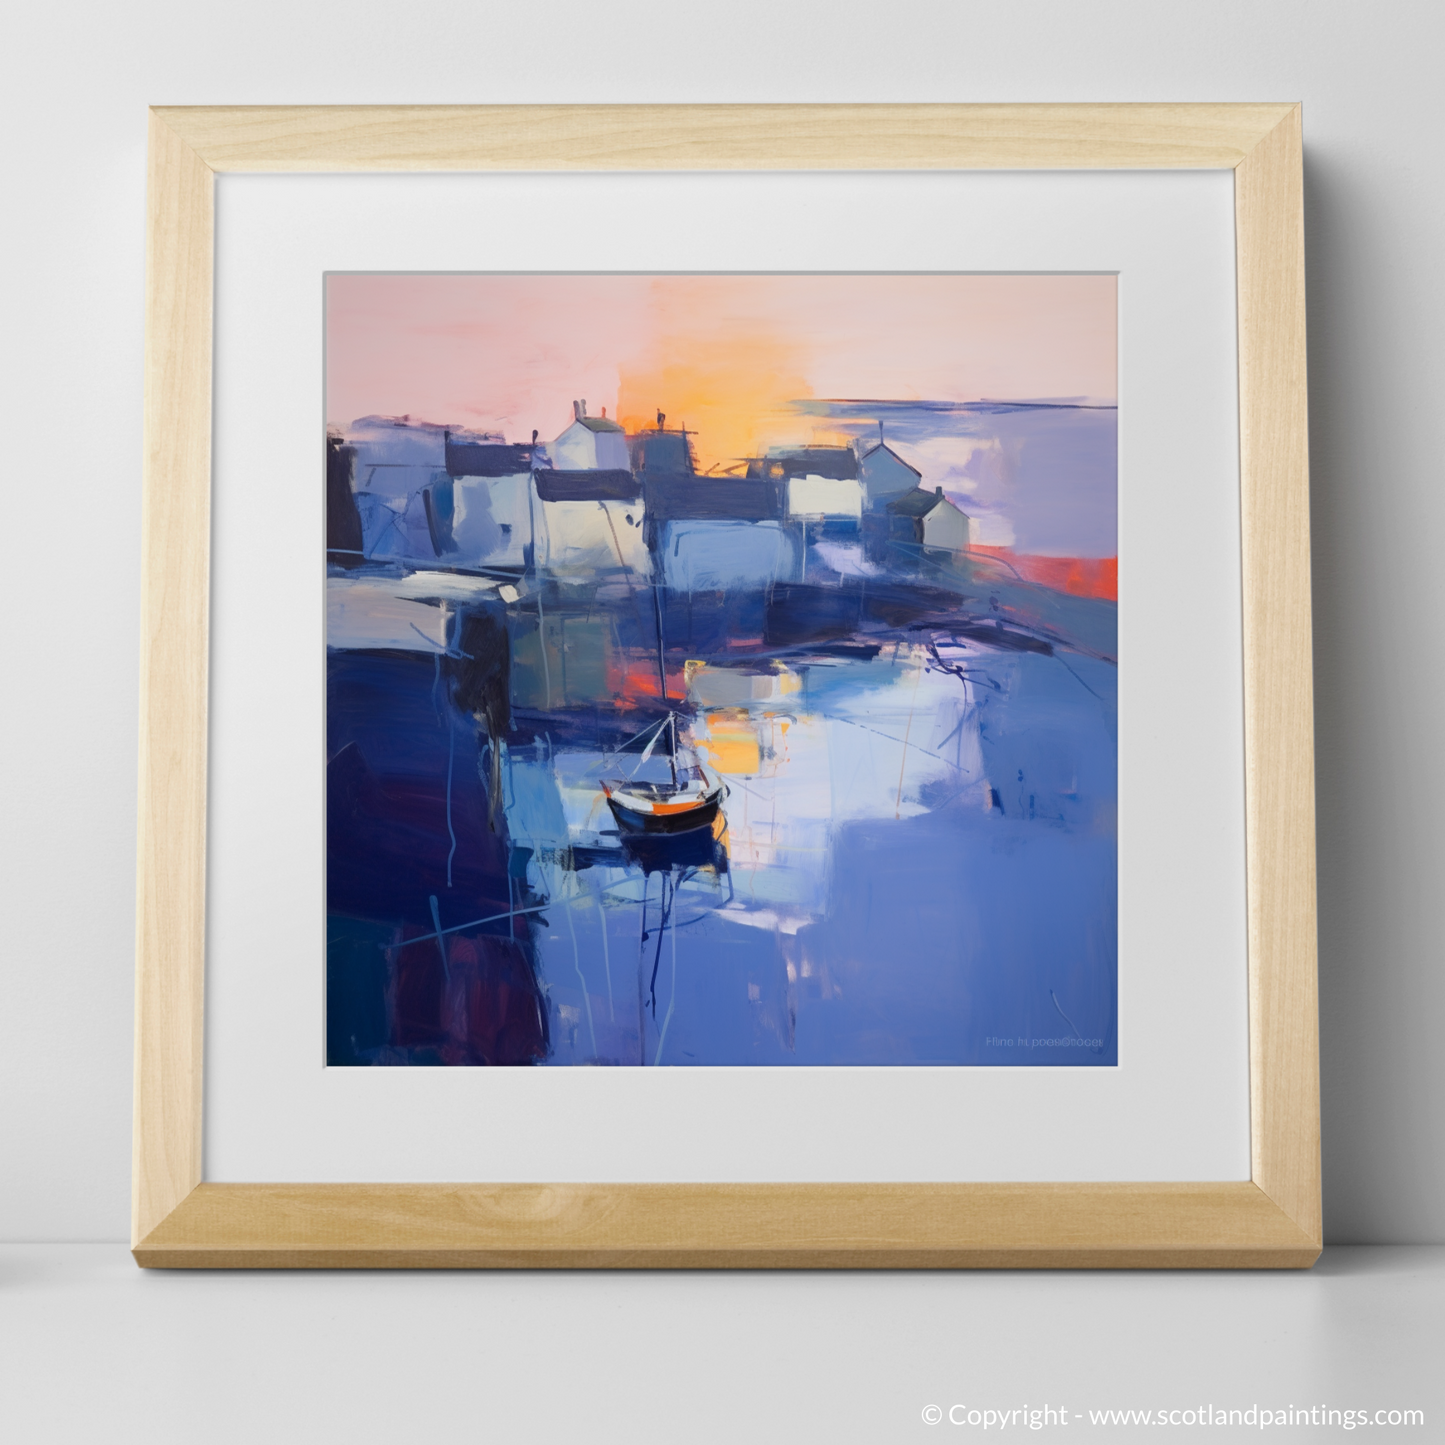 Dusk at Gardenstown Harbour: An Abstract Delight